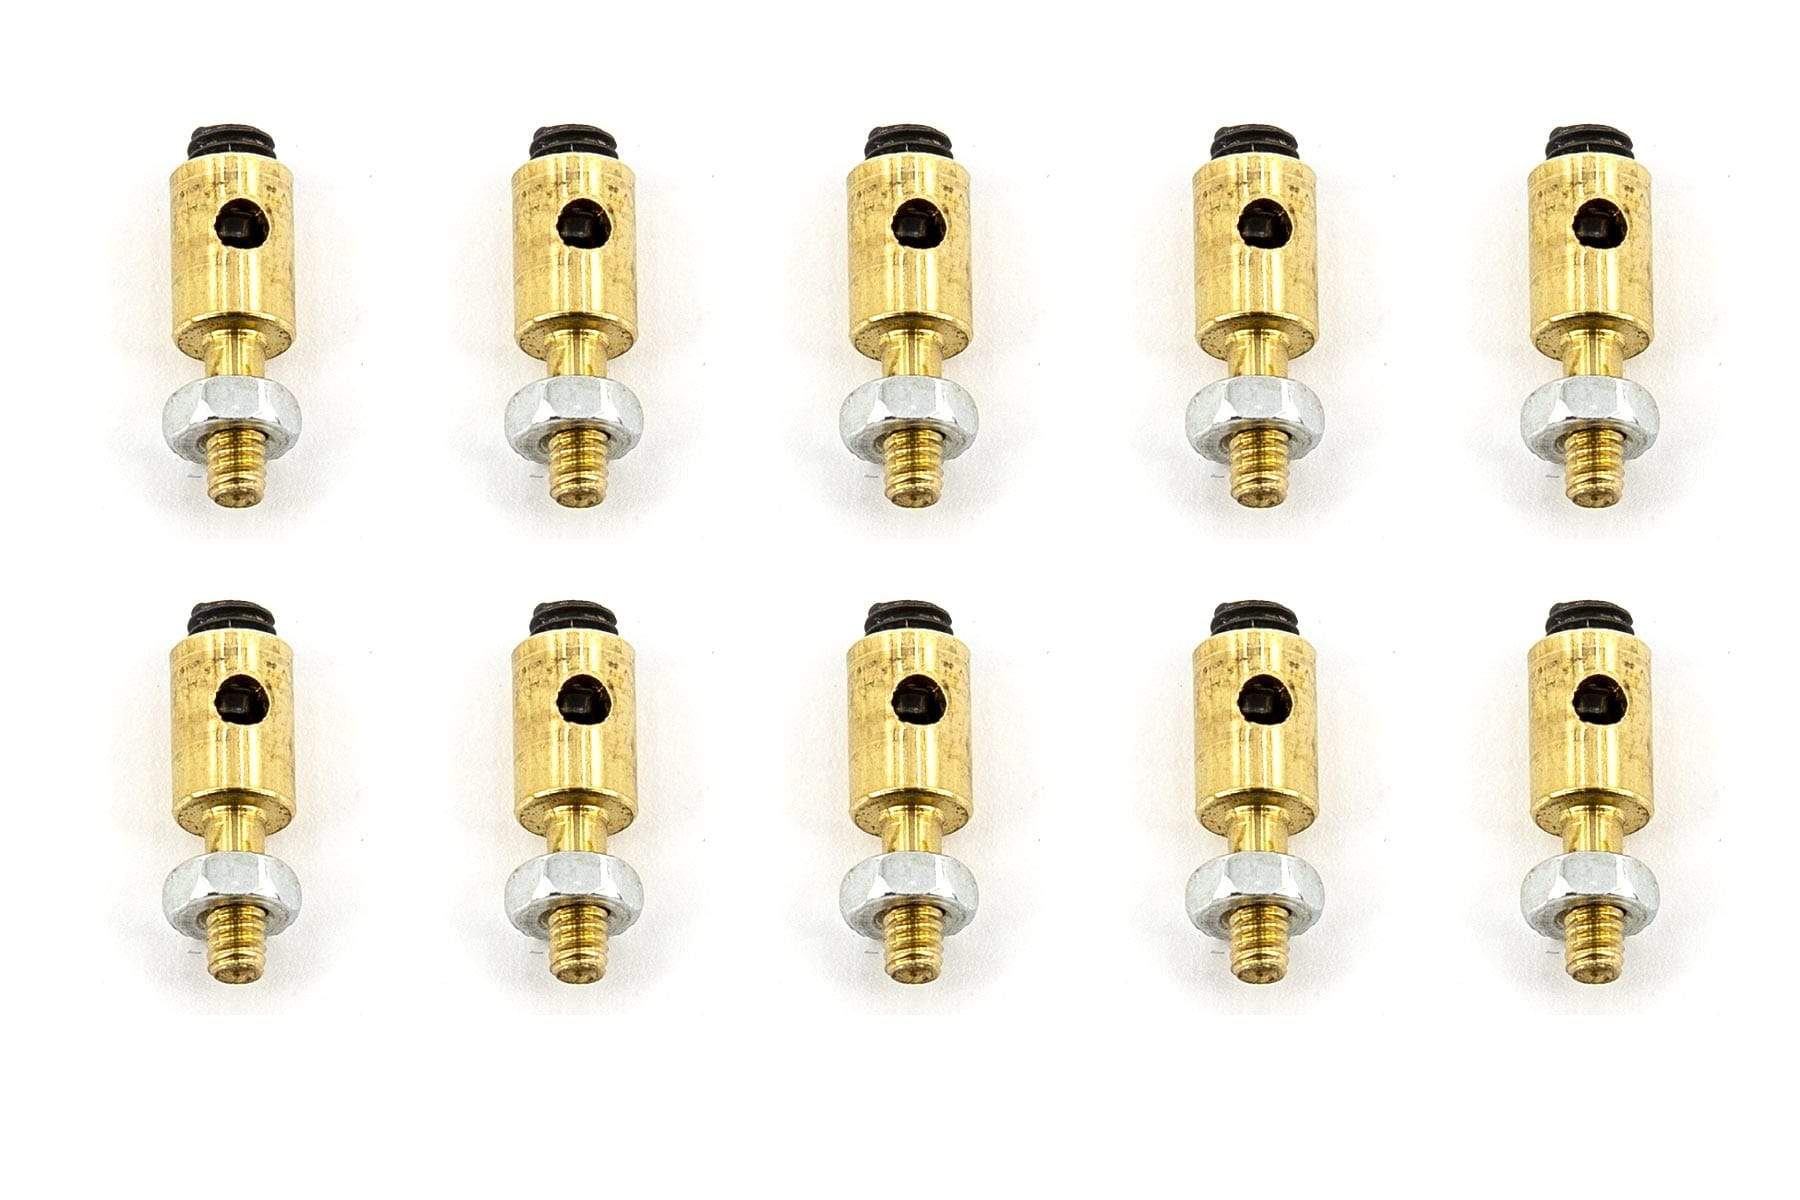 BenchCraft 1.8mm Link Stops (10 Pack) BCT5060-003